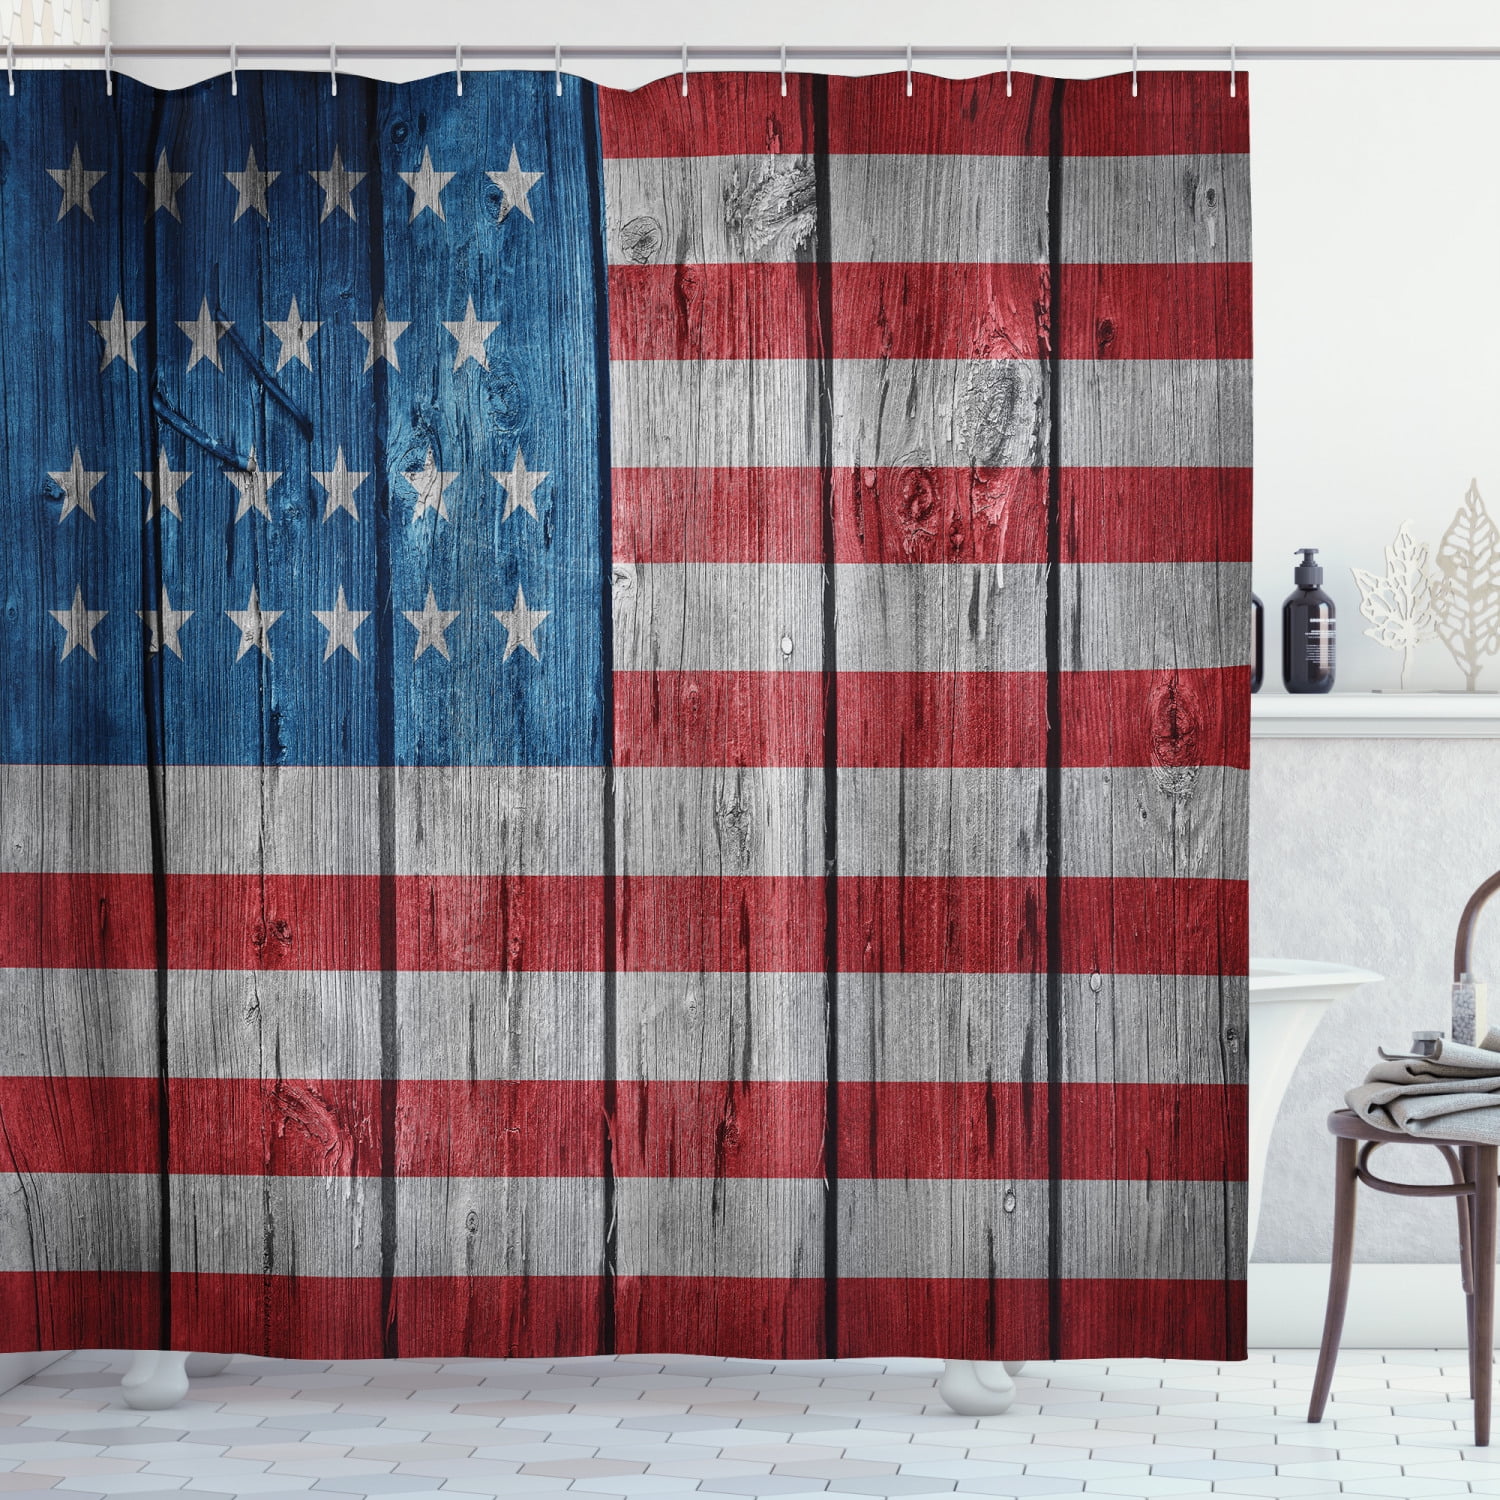 Fireworks in Front of America Flag Shower Curtain Set Patriotic Bathroom 72X72" 